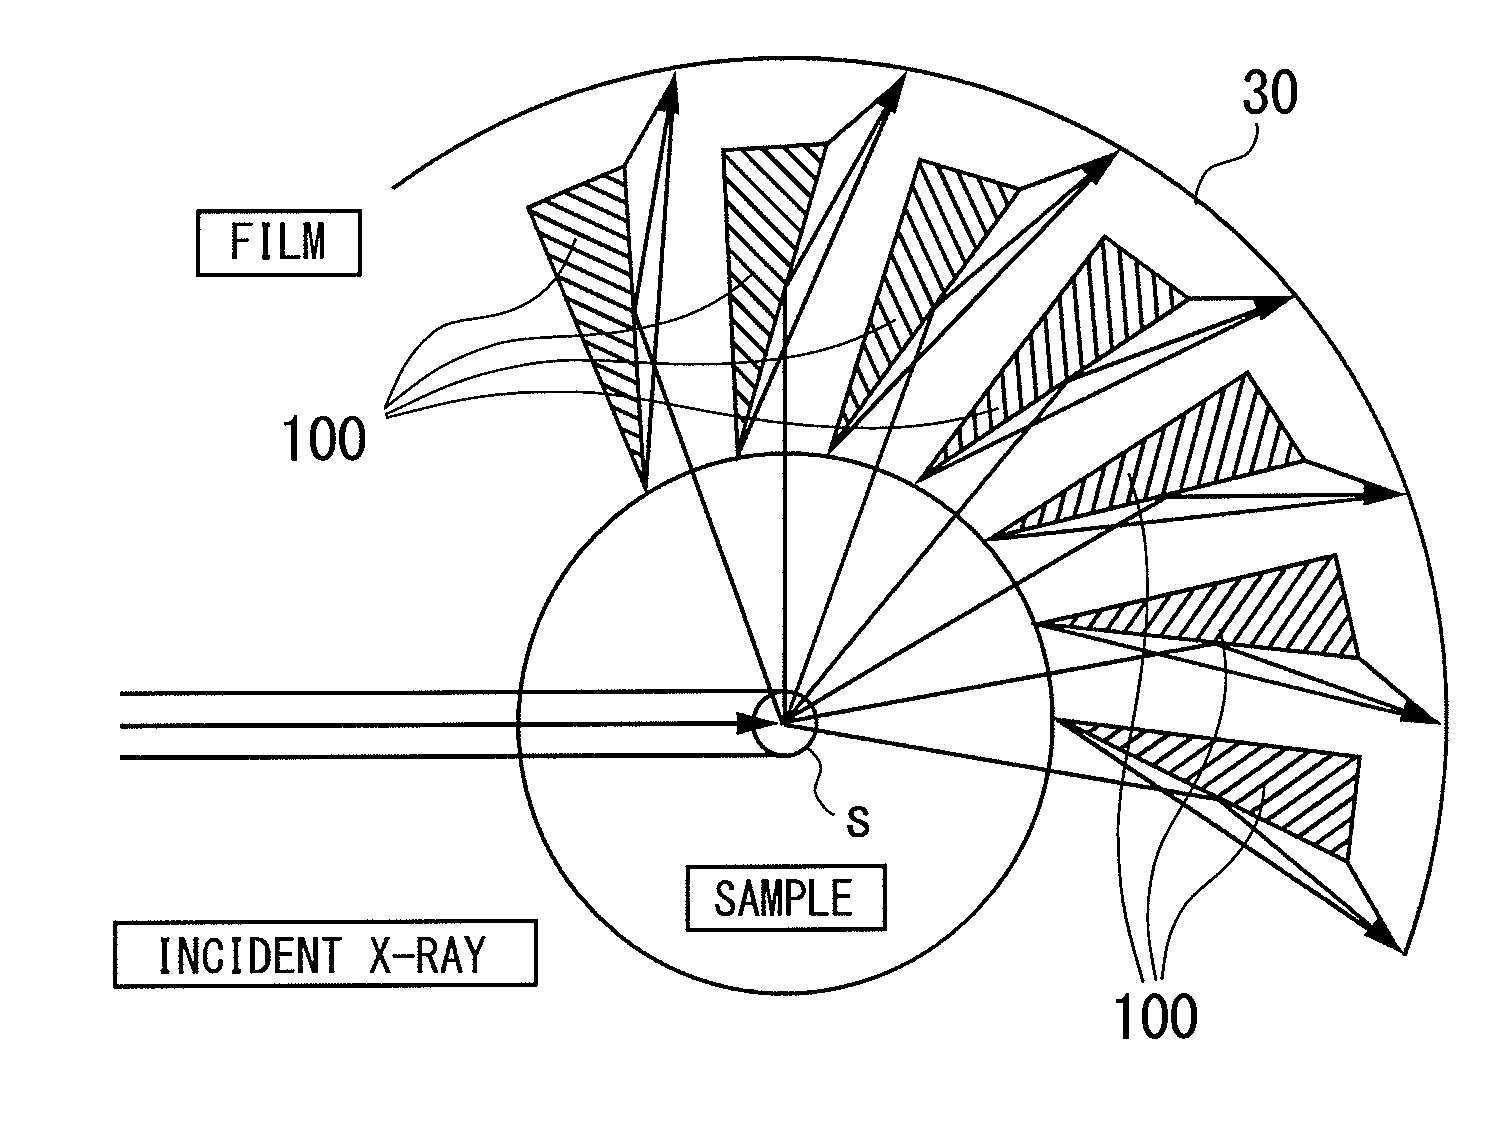 X-ray diffraction measuring apparatus having debye-scherrer optical system therein, and an X-ray diffraction measuring method for the same